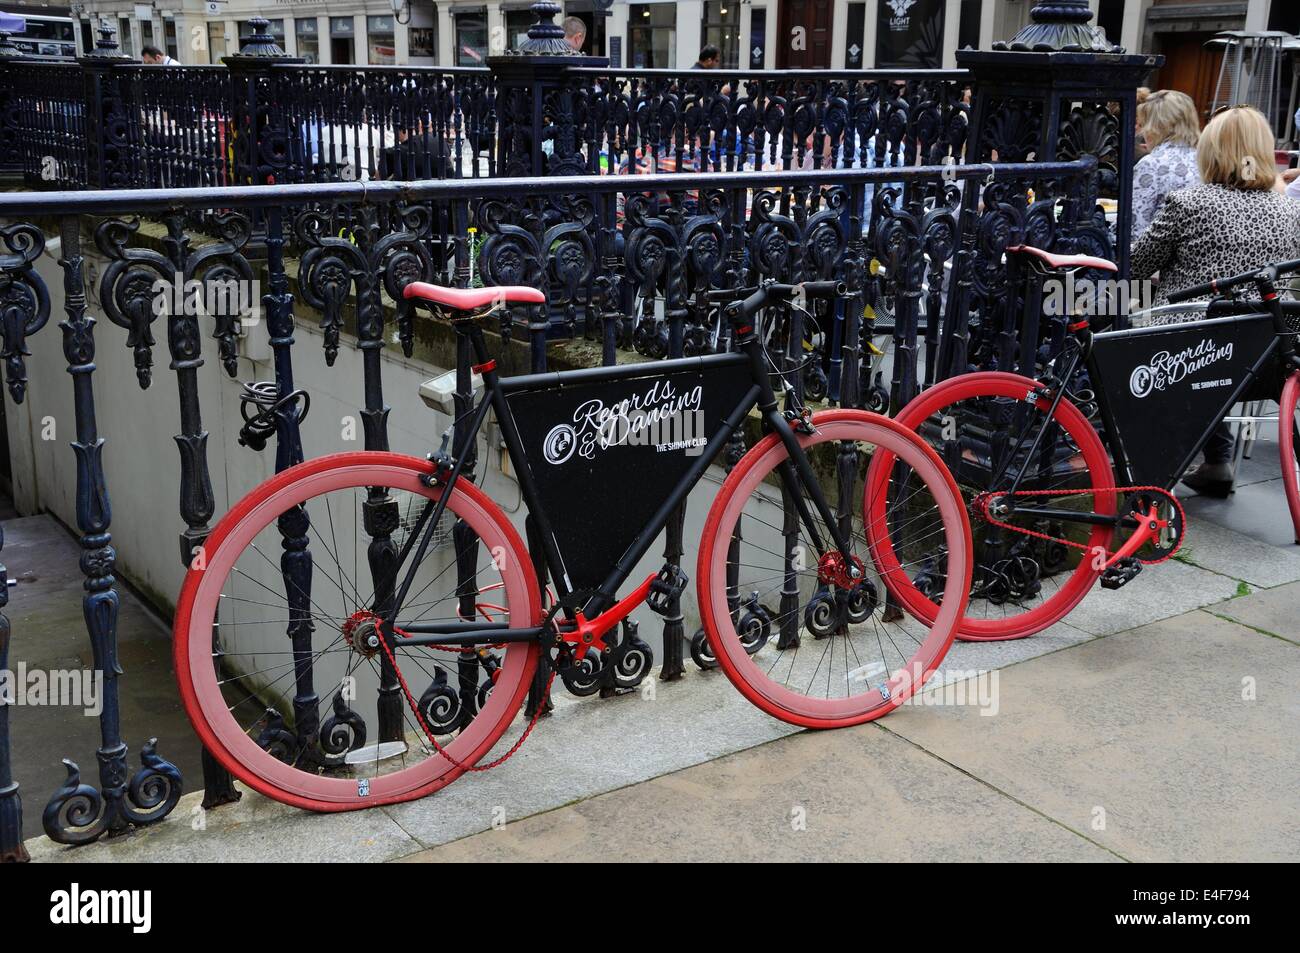 Bikes with red tyres advertising the Shimmy night club in Glasgow city centre Stock Photo